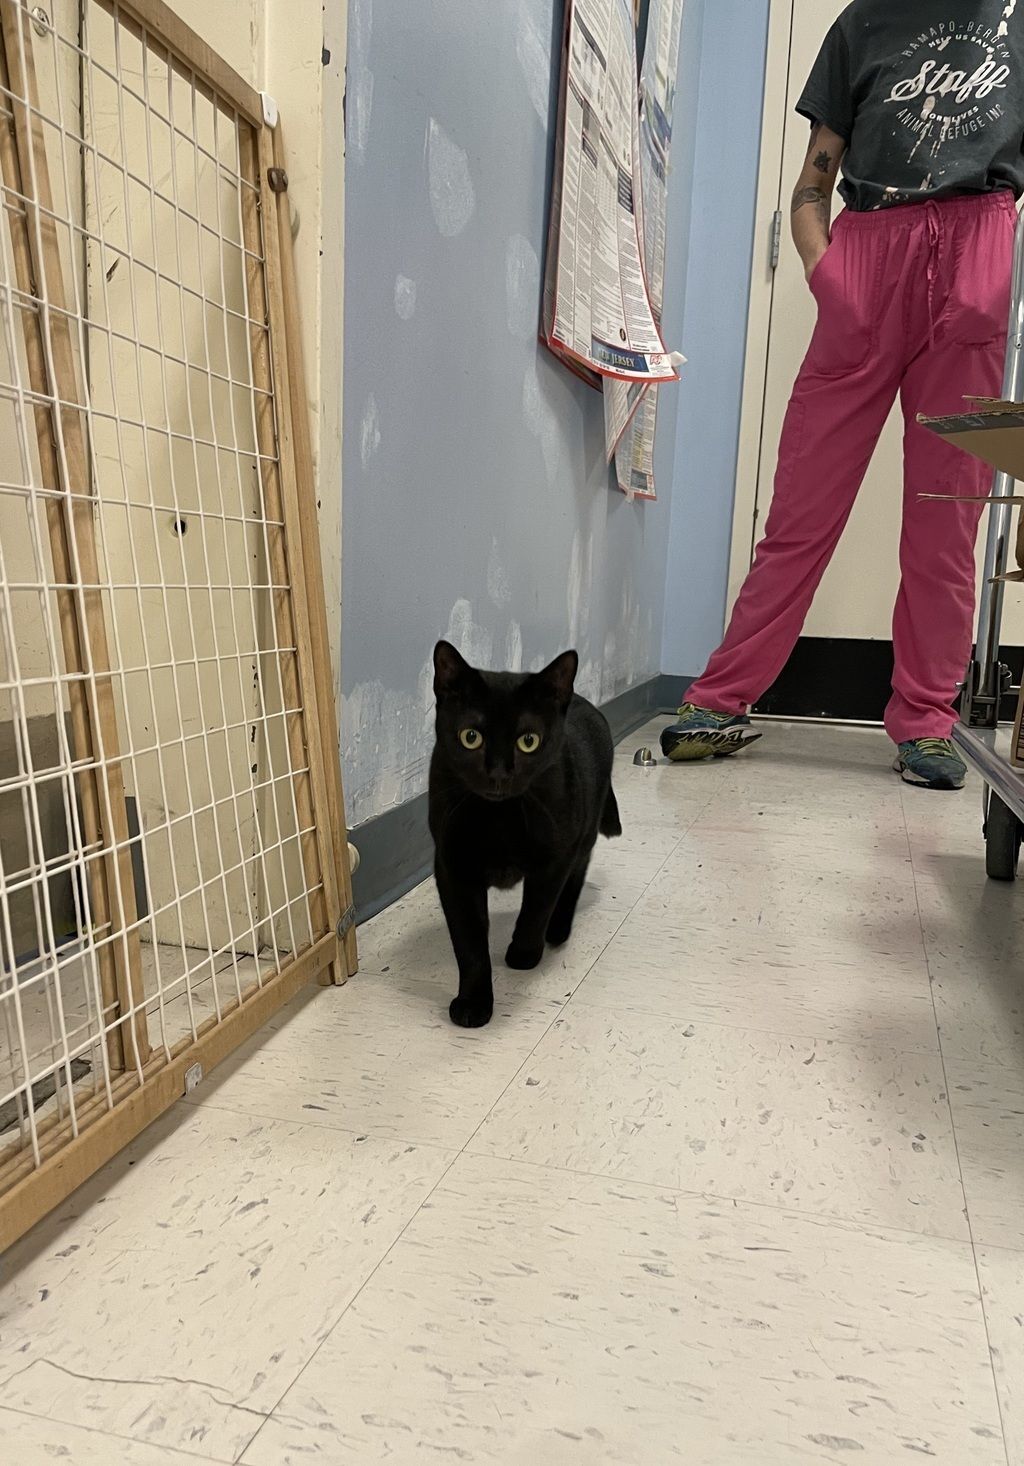 Black cat, whom no one wanted to adopt, goes viral